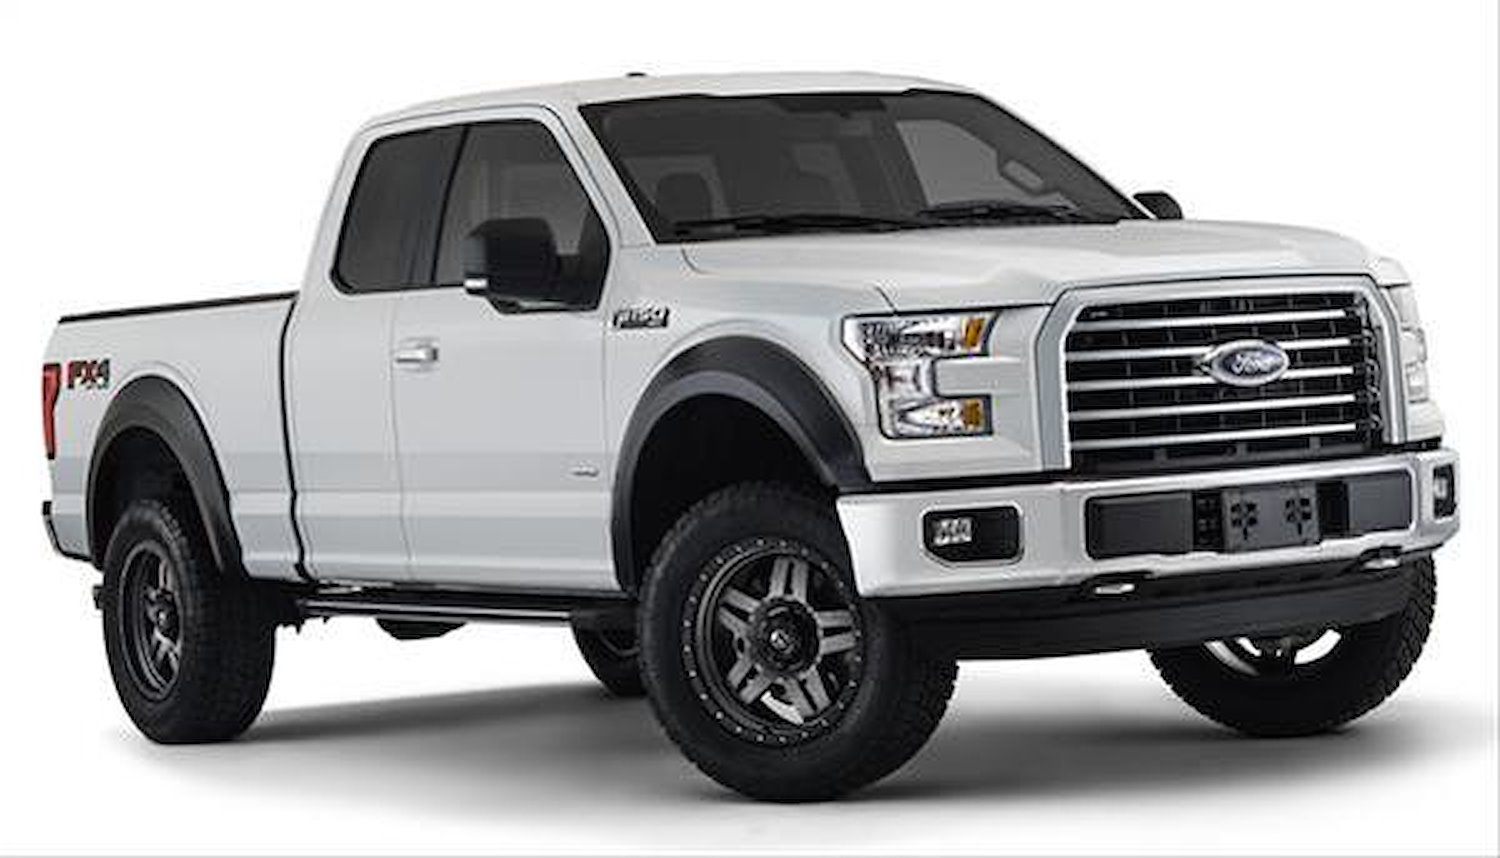 Extend-A-Fender Flares 2015 Ford F150